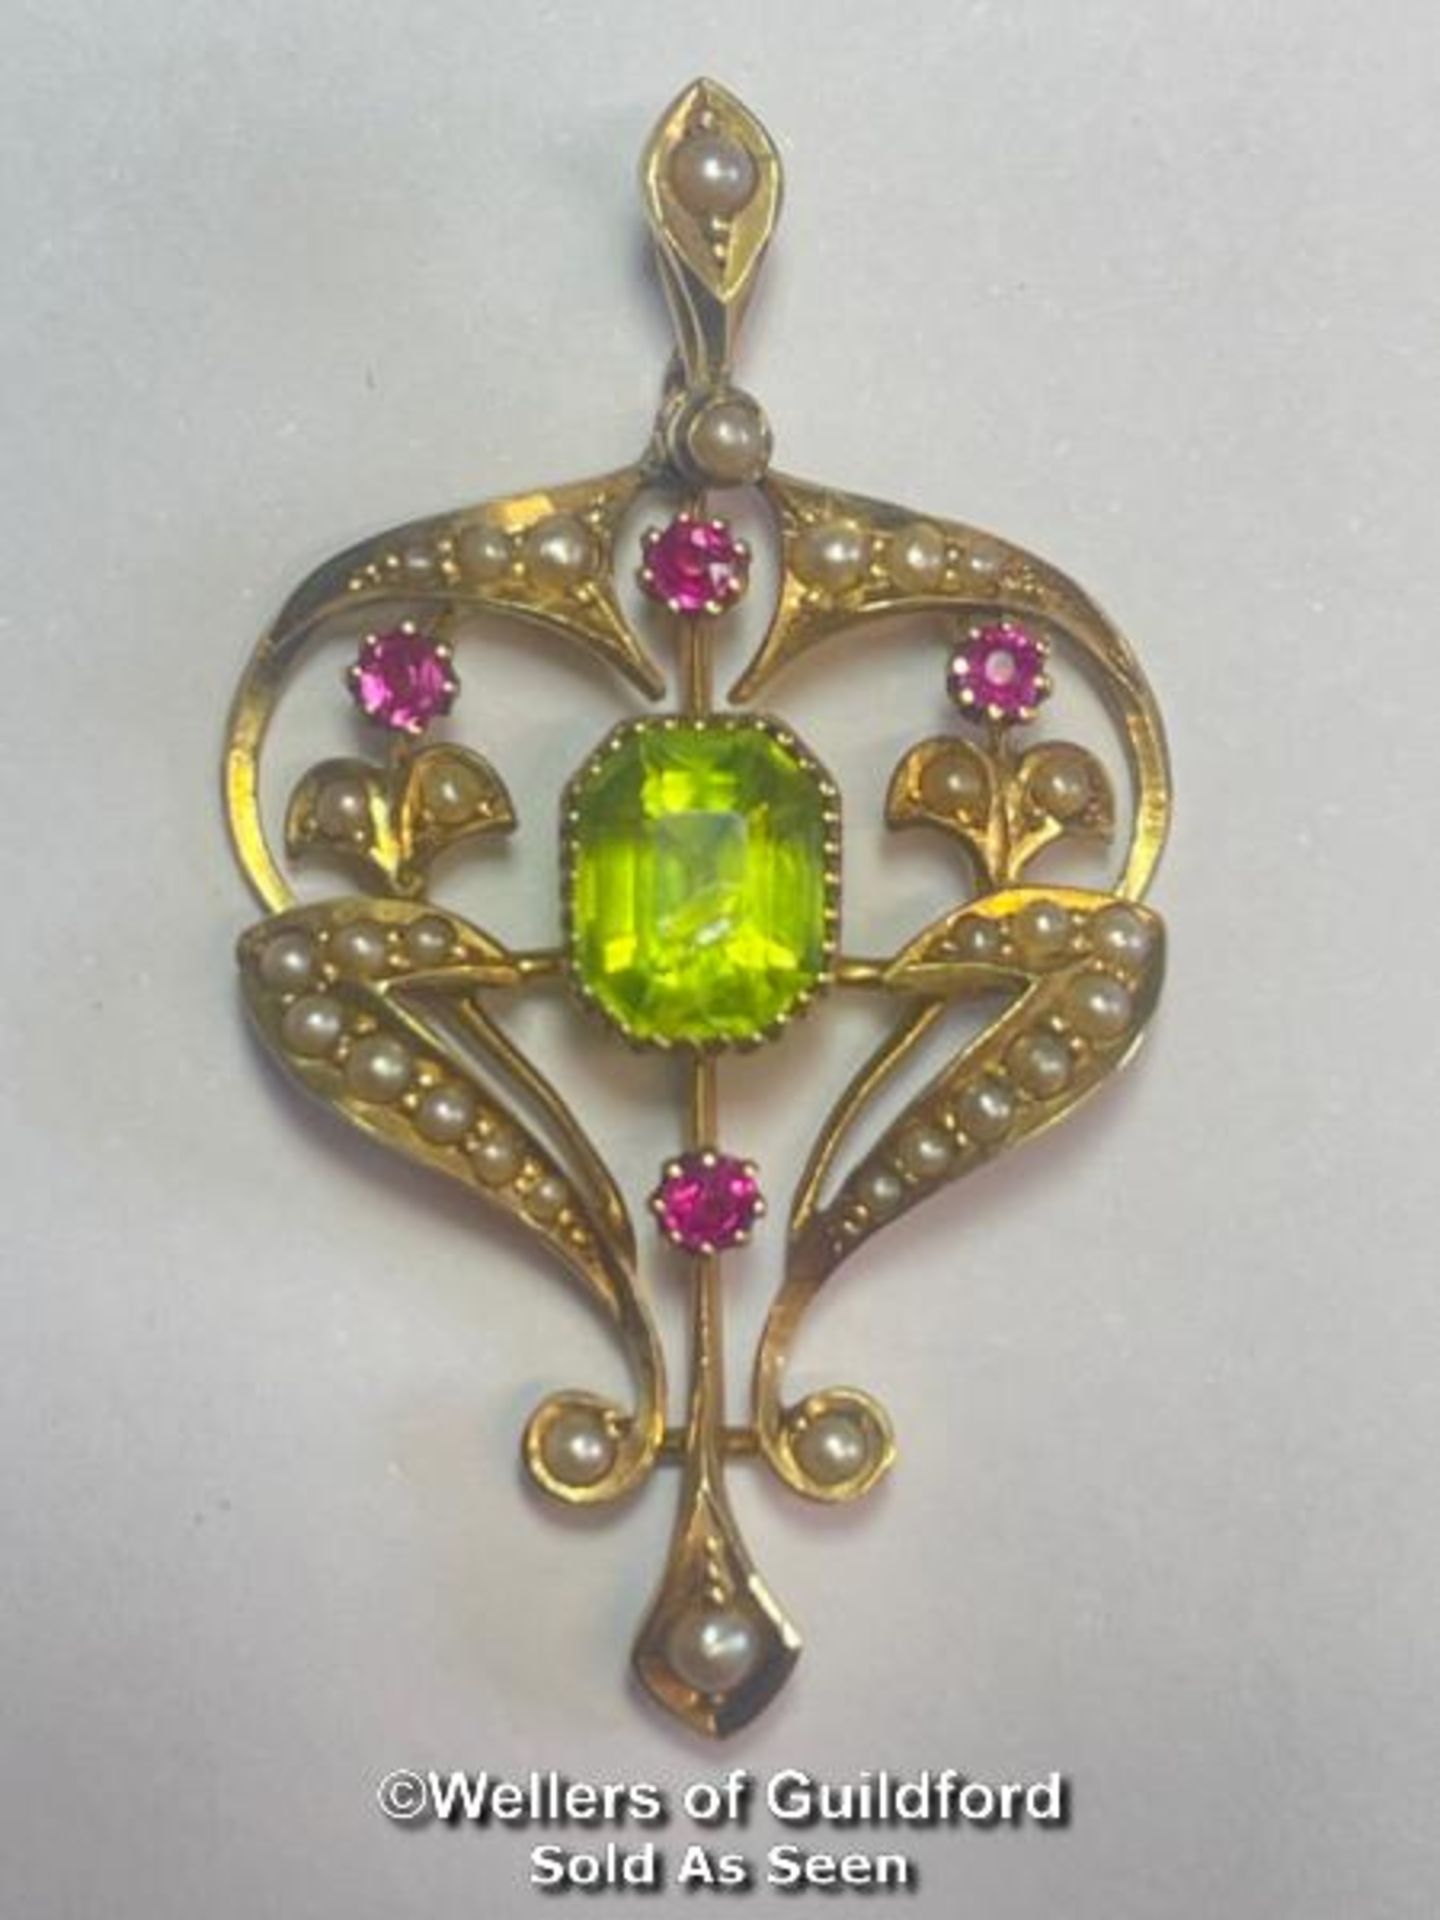 ART NOUVEAU PENDANT STAMPED 15CT SET WITH PERIDOT, RUBIES AND SPLIT SEED PEARLS. WEIGHT 3.9G,